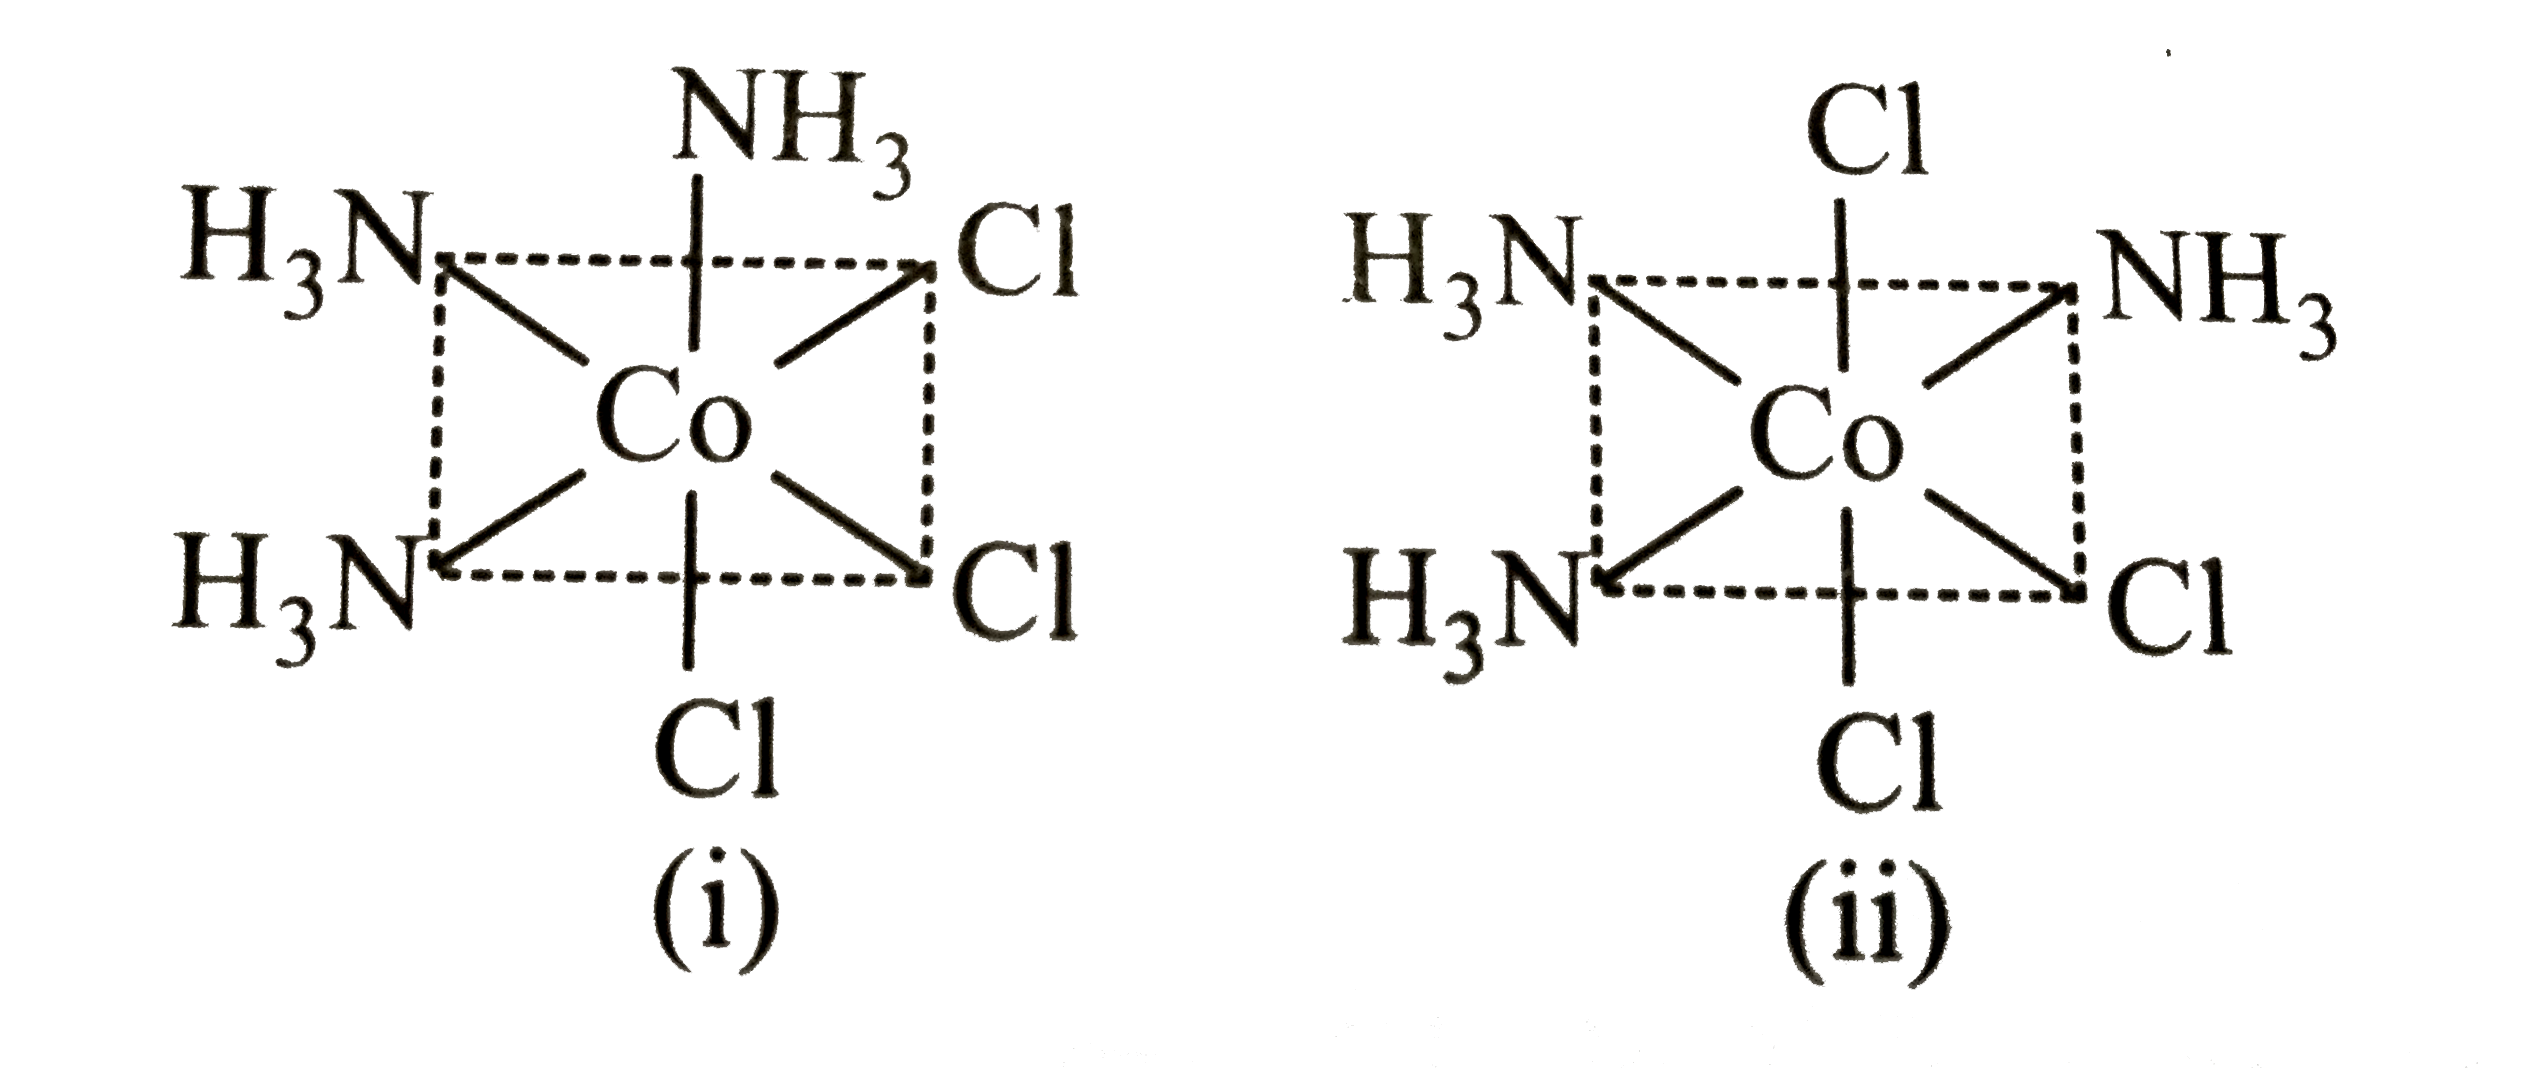 Two isomers of a compound Co(NH(3))(3)Cl(3) (MA(3)B(3) type ) are shown in the figures .      The isomers can be classified as